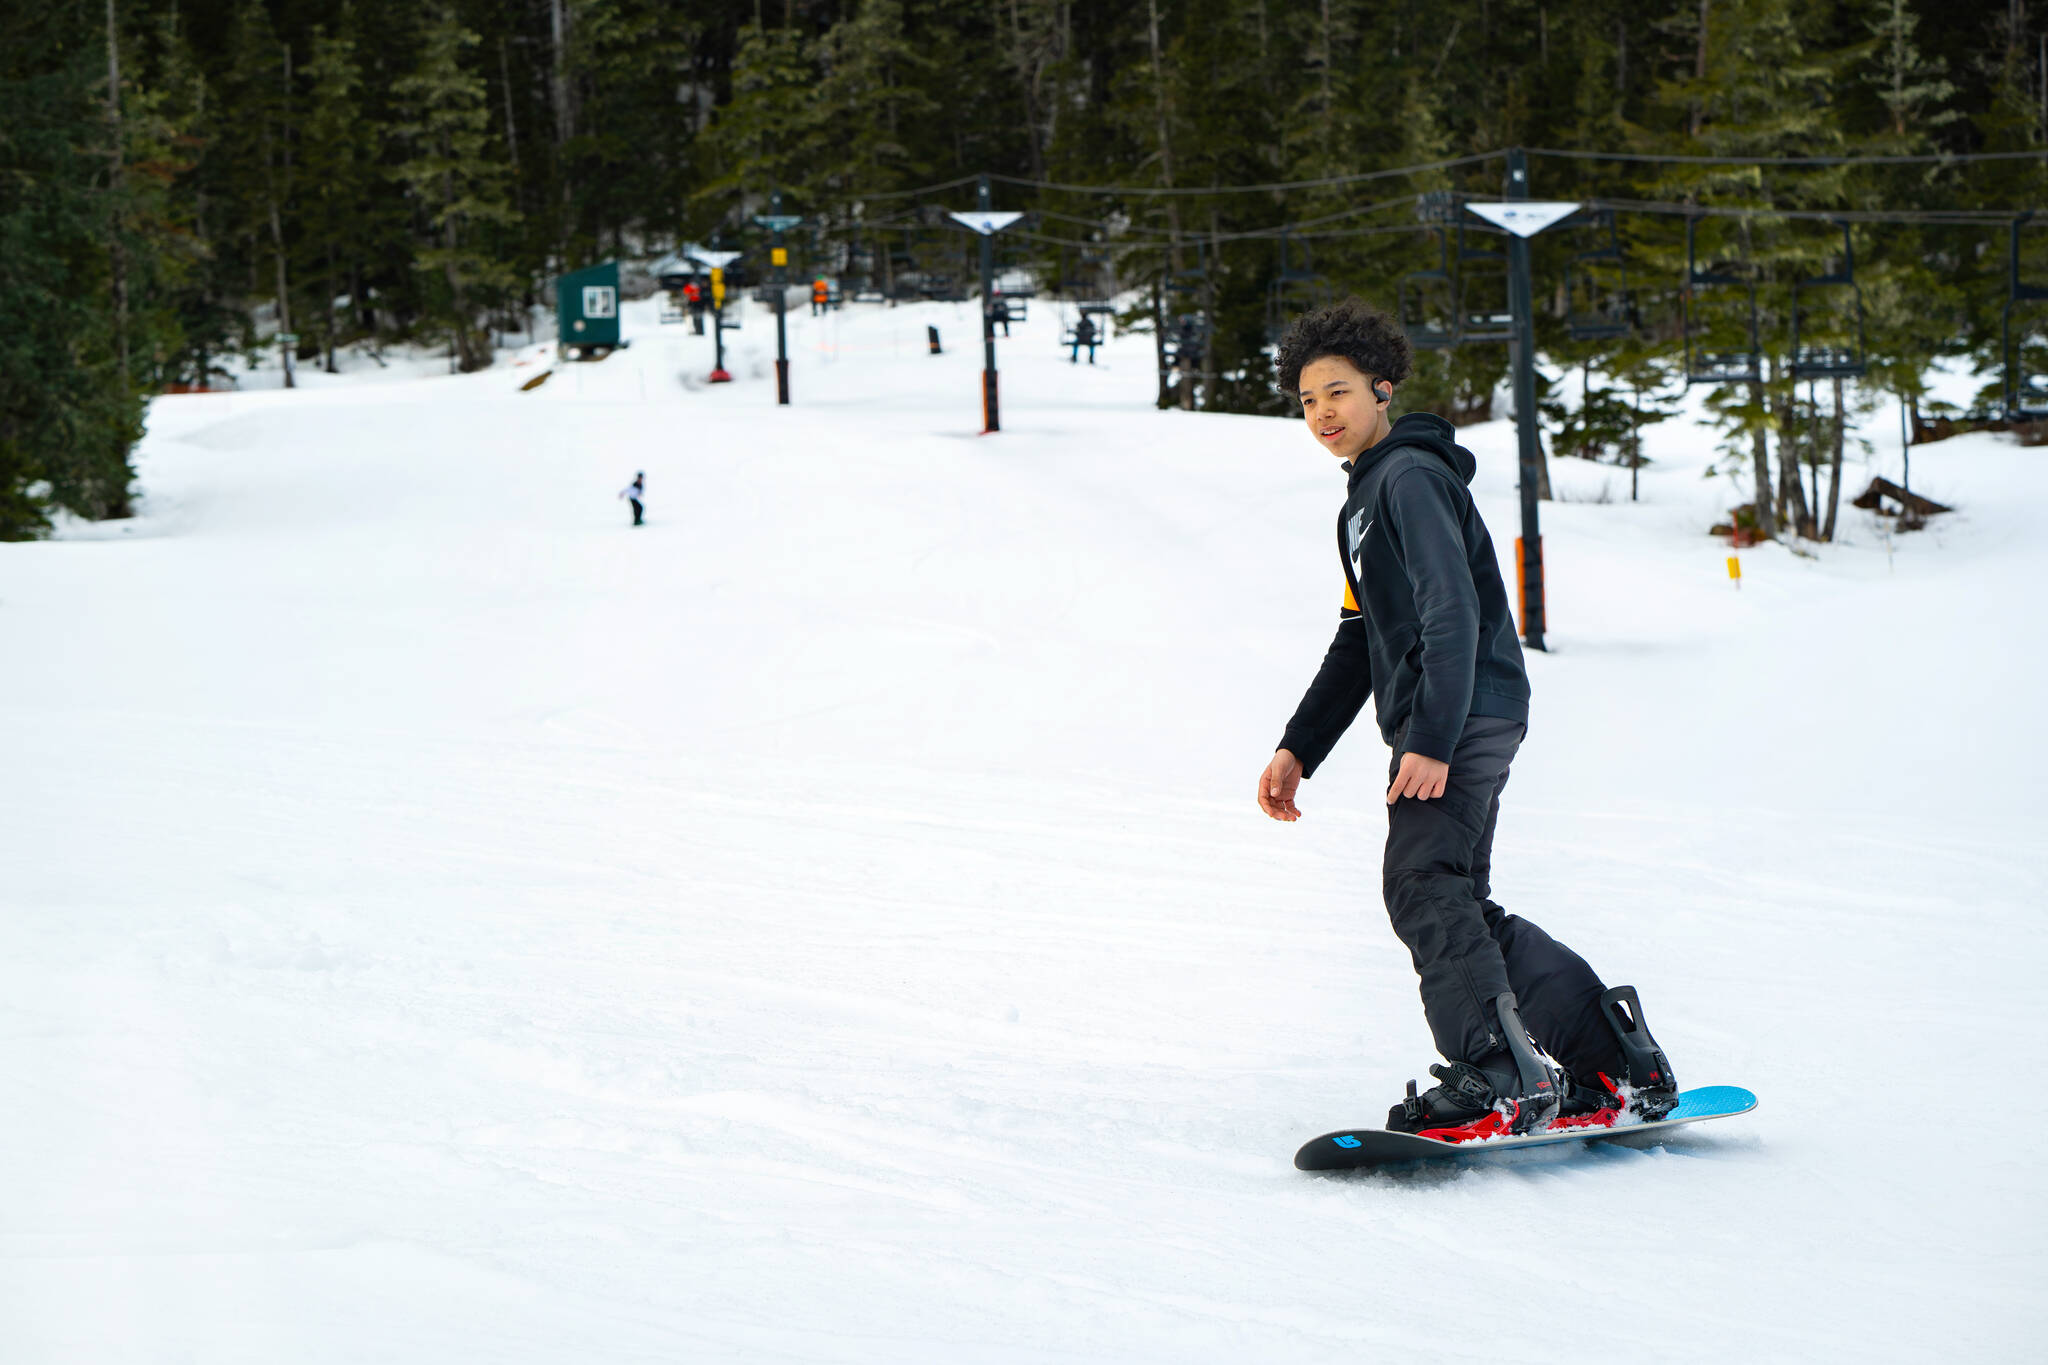 Wyatt Miramontes makes a turn down the Dolly Varden run where most participants begin their journey learning to ski and snowboard at Snow Camp with lessons through Eaglecrest Snowsports School. (Photo by Lee House / Sitka Conservation Society)